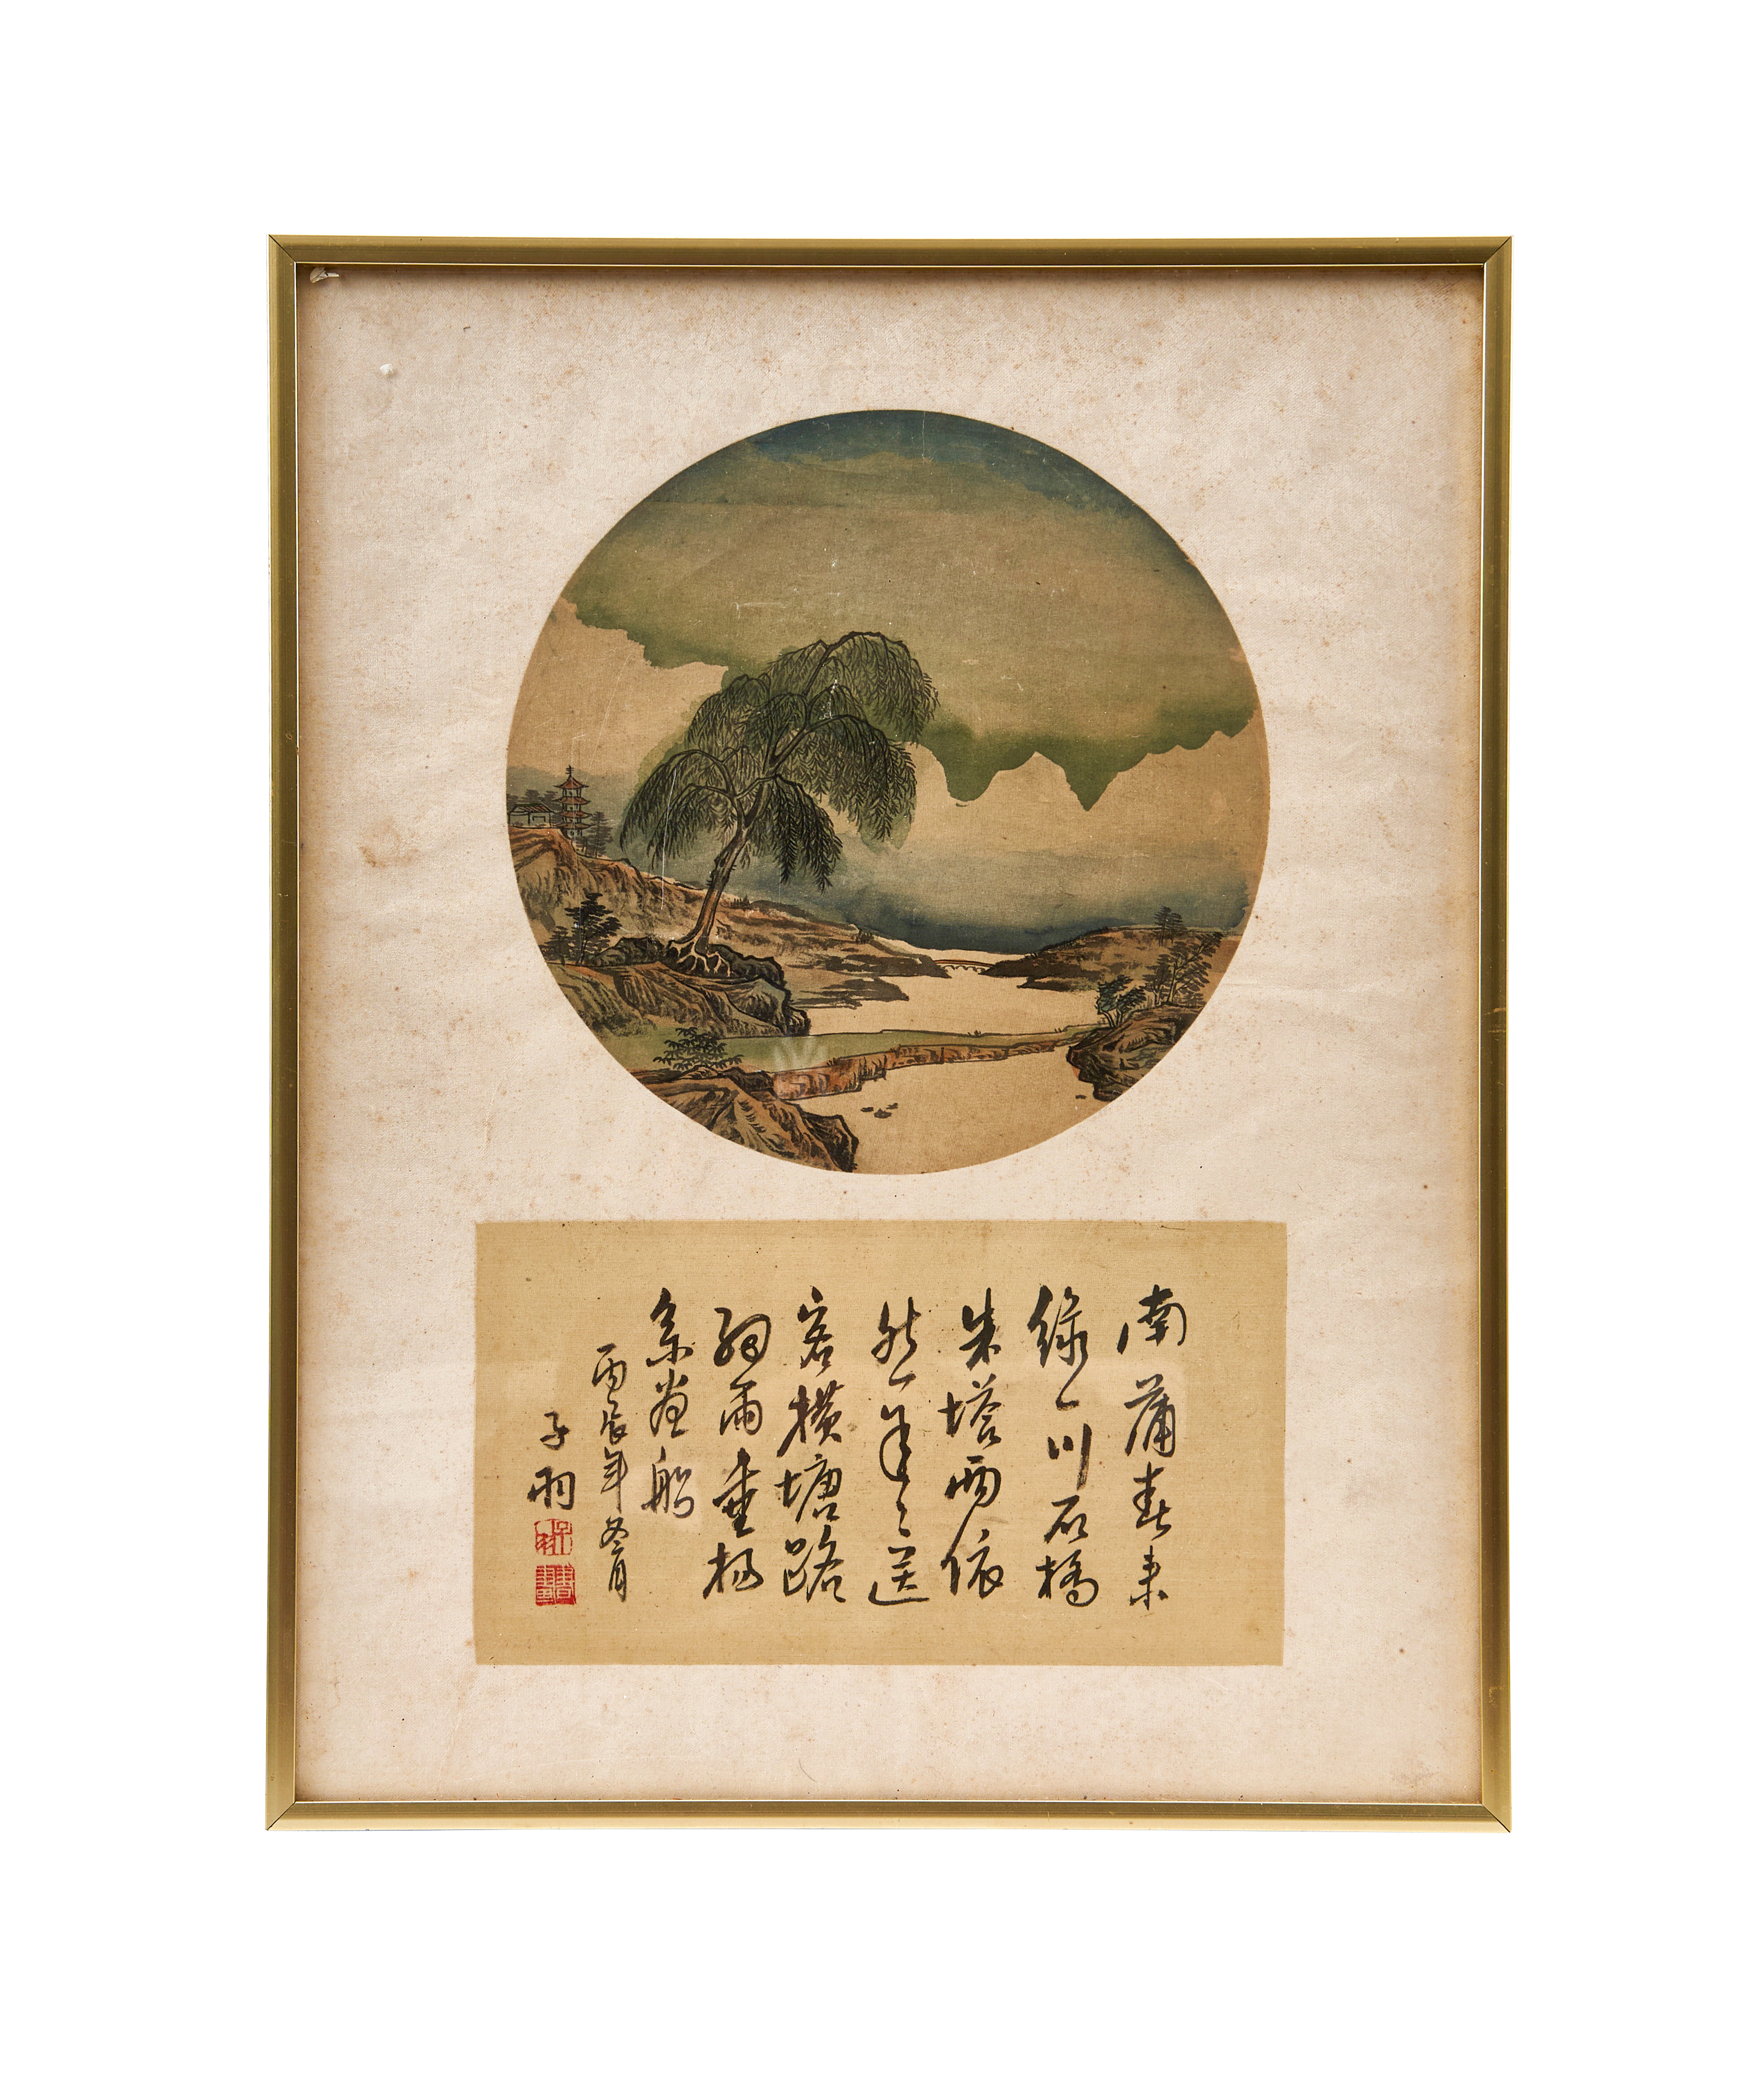 AN INSCRIBED SCROLL PAINTING, QING DYNASTY (1644-1911) - Image 2 of 2